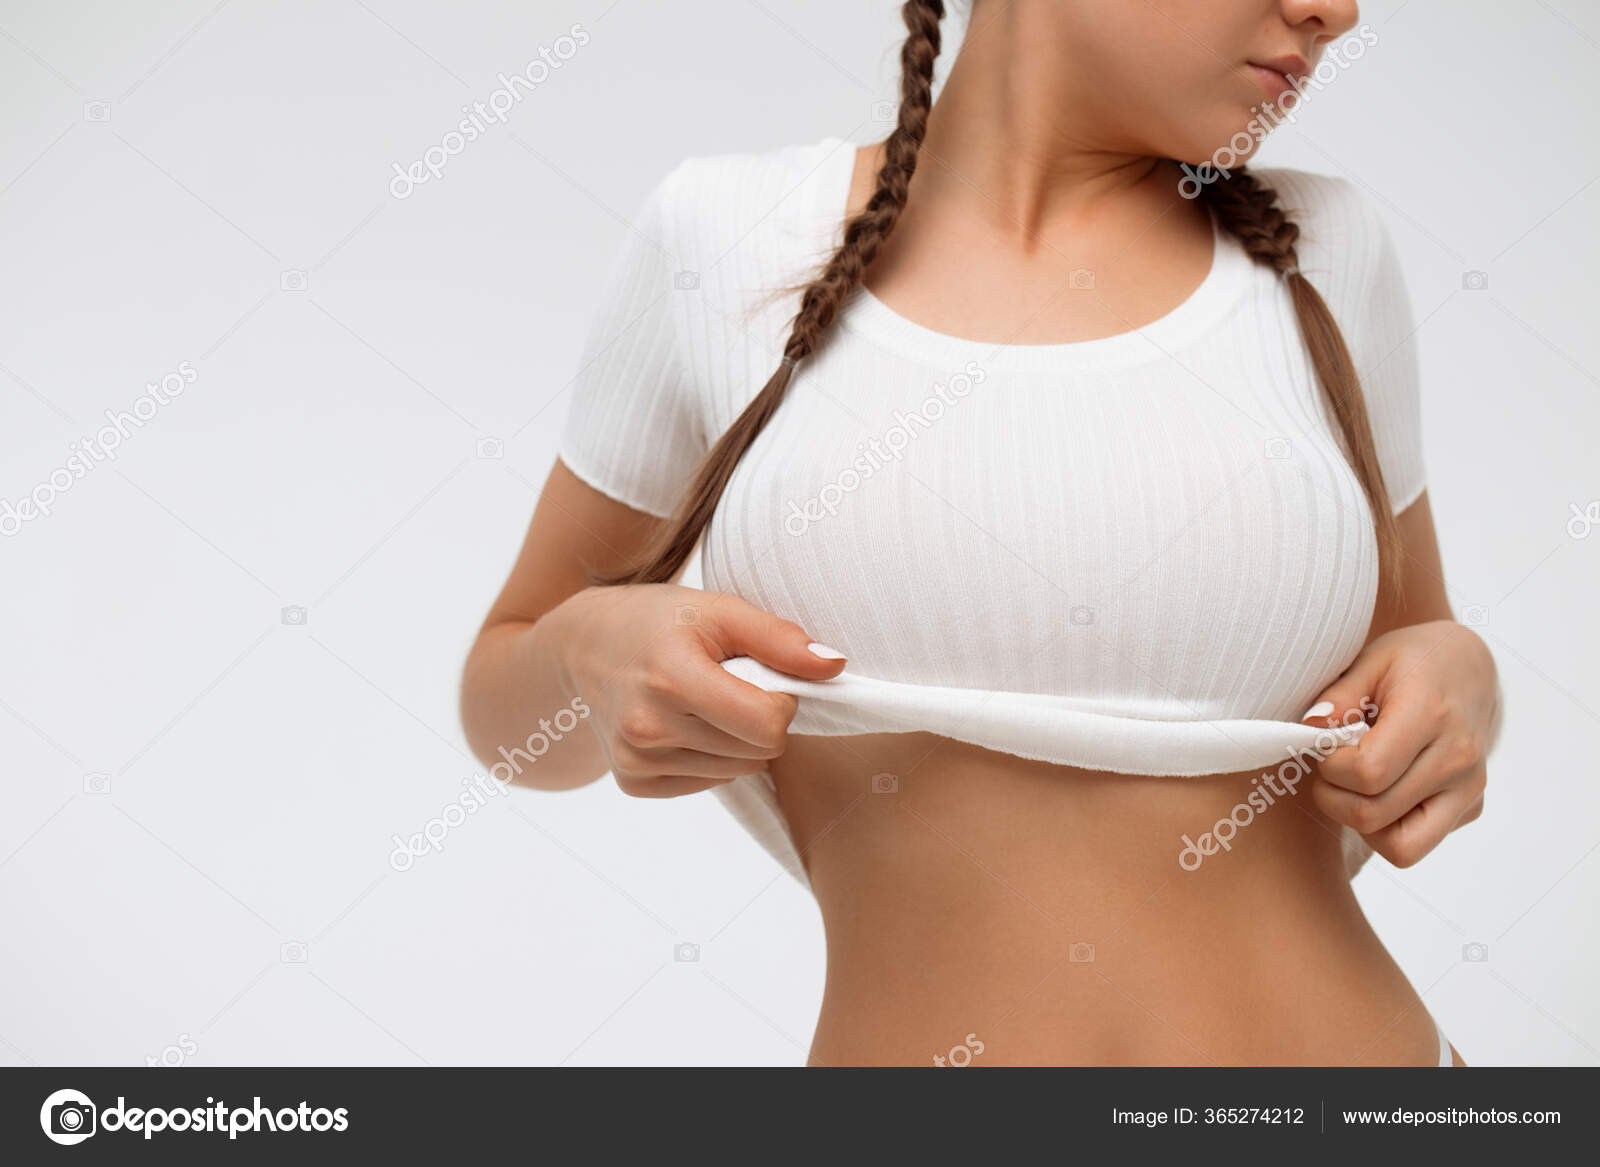 Young Female Body With Small Breasts In White Shirt Stock Photo